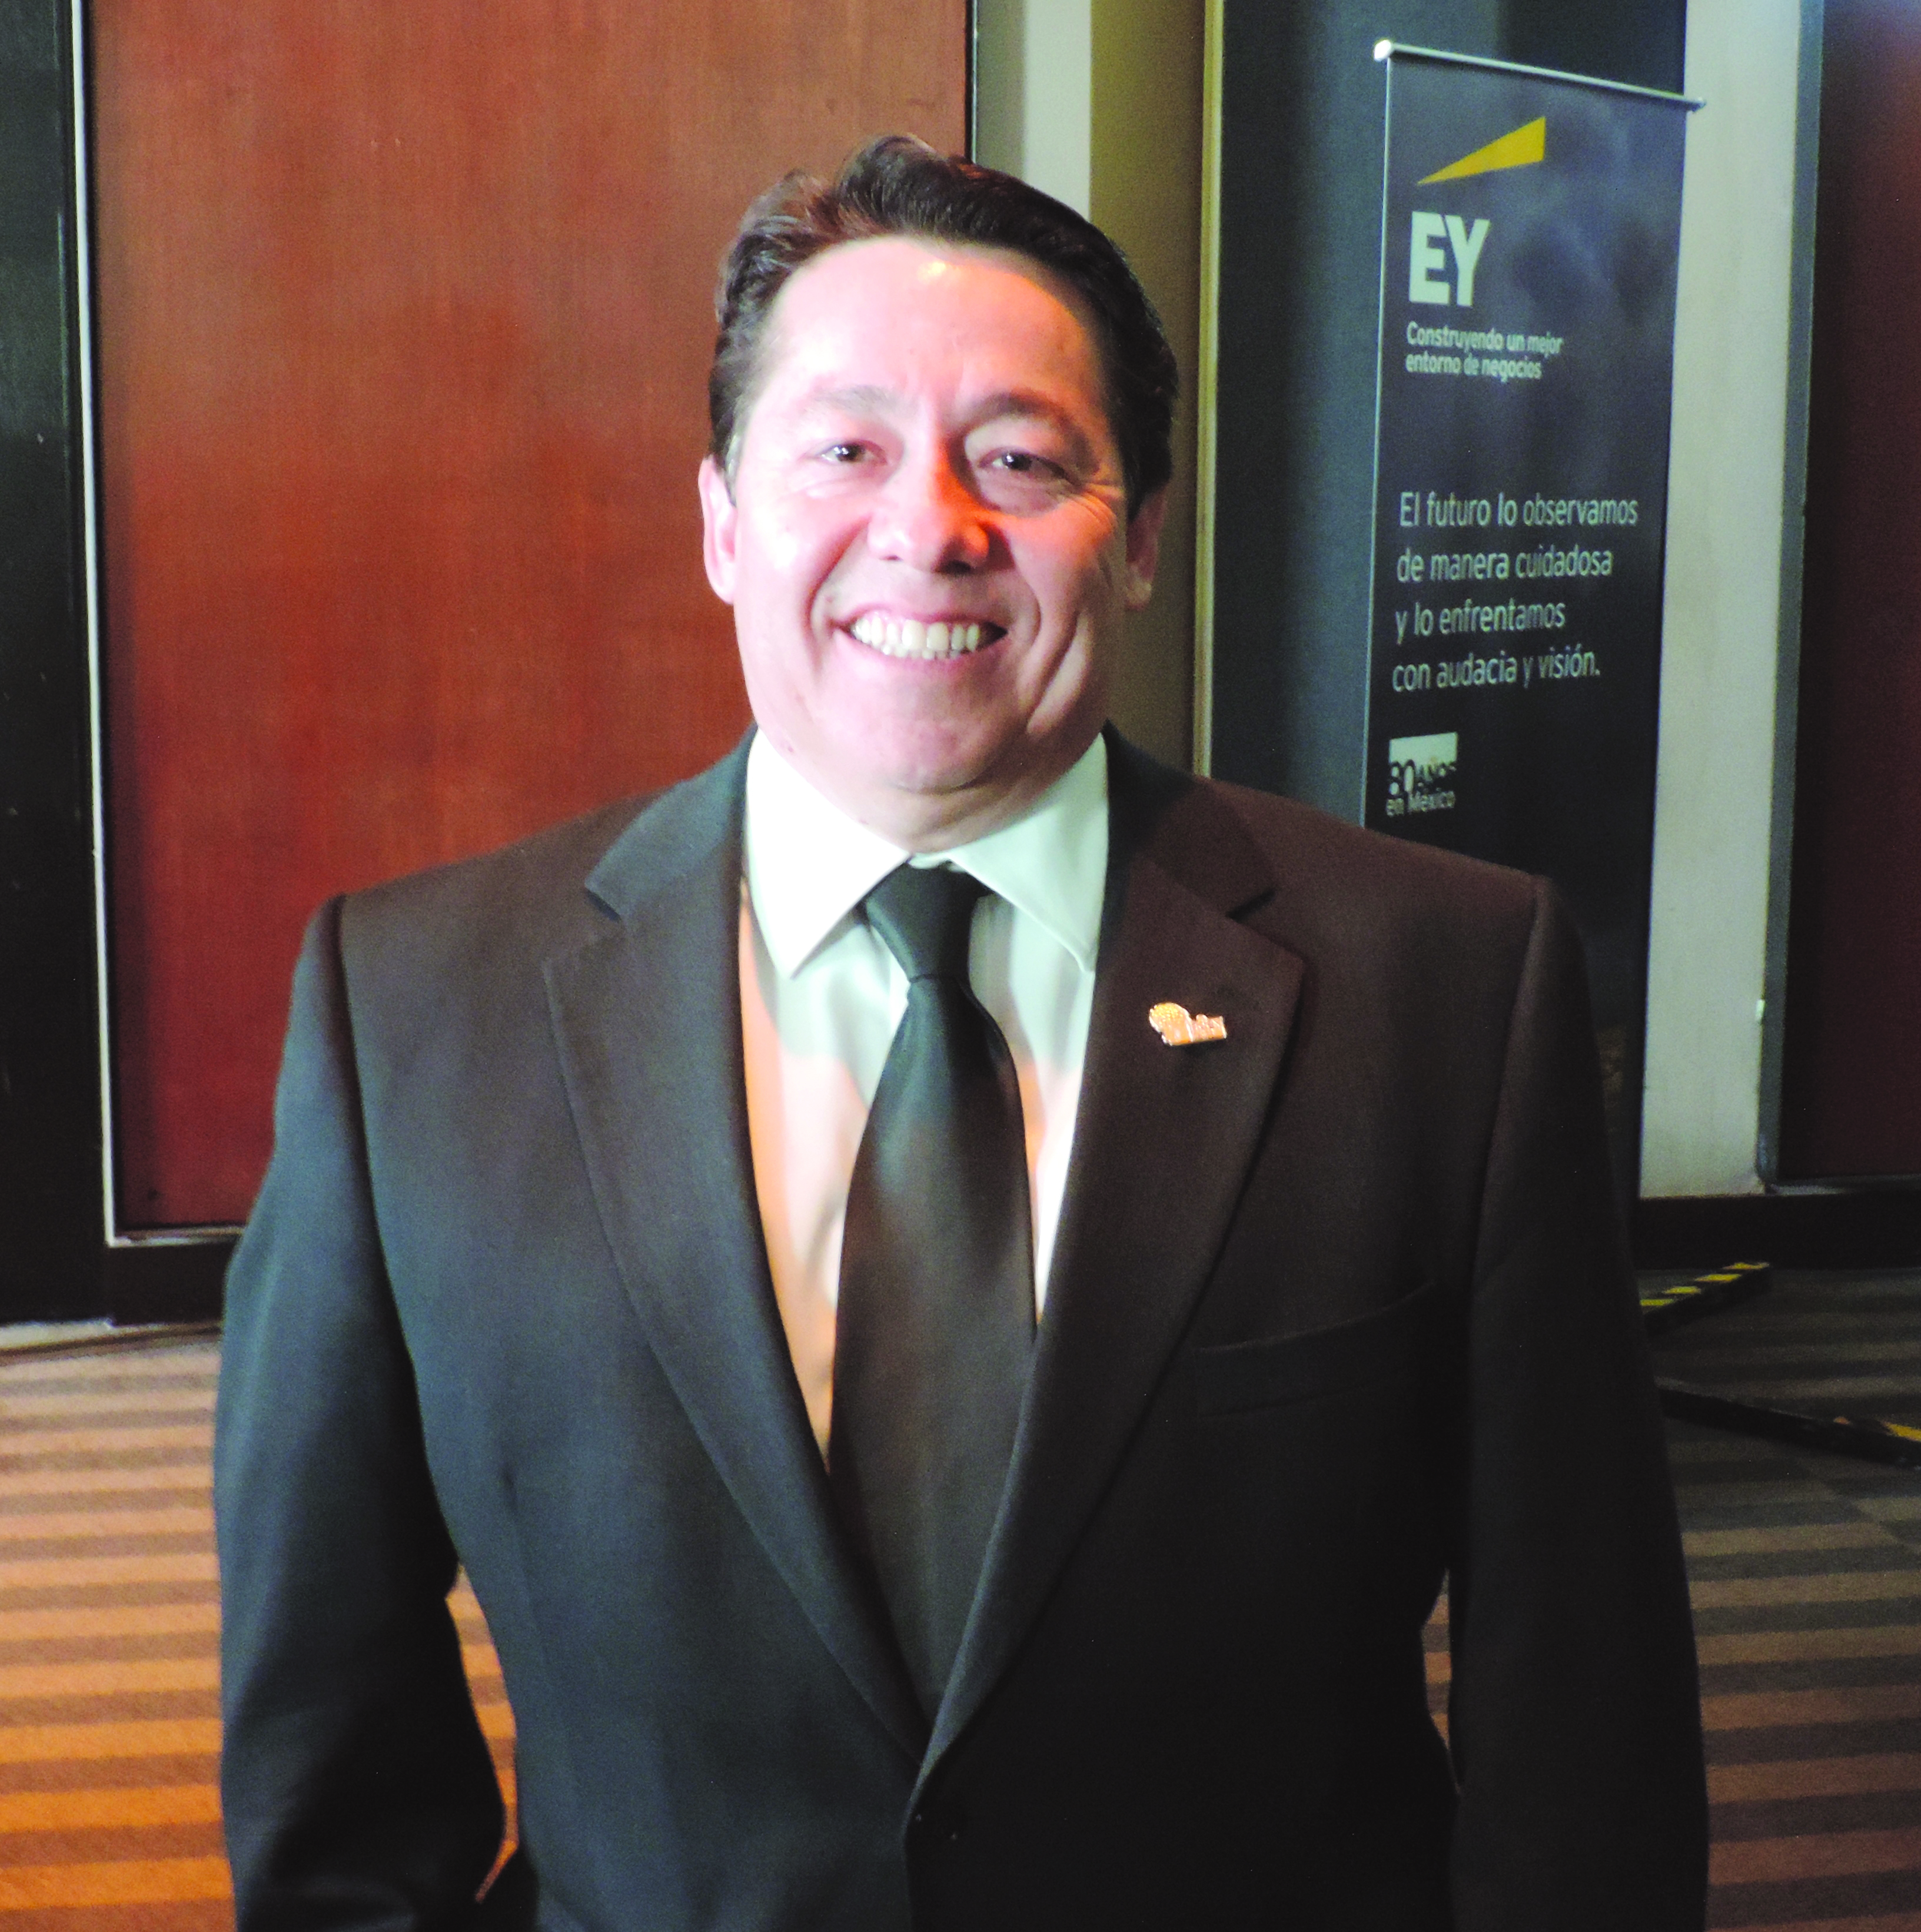 Mexicali bets on technical education and high-tech industries